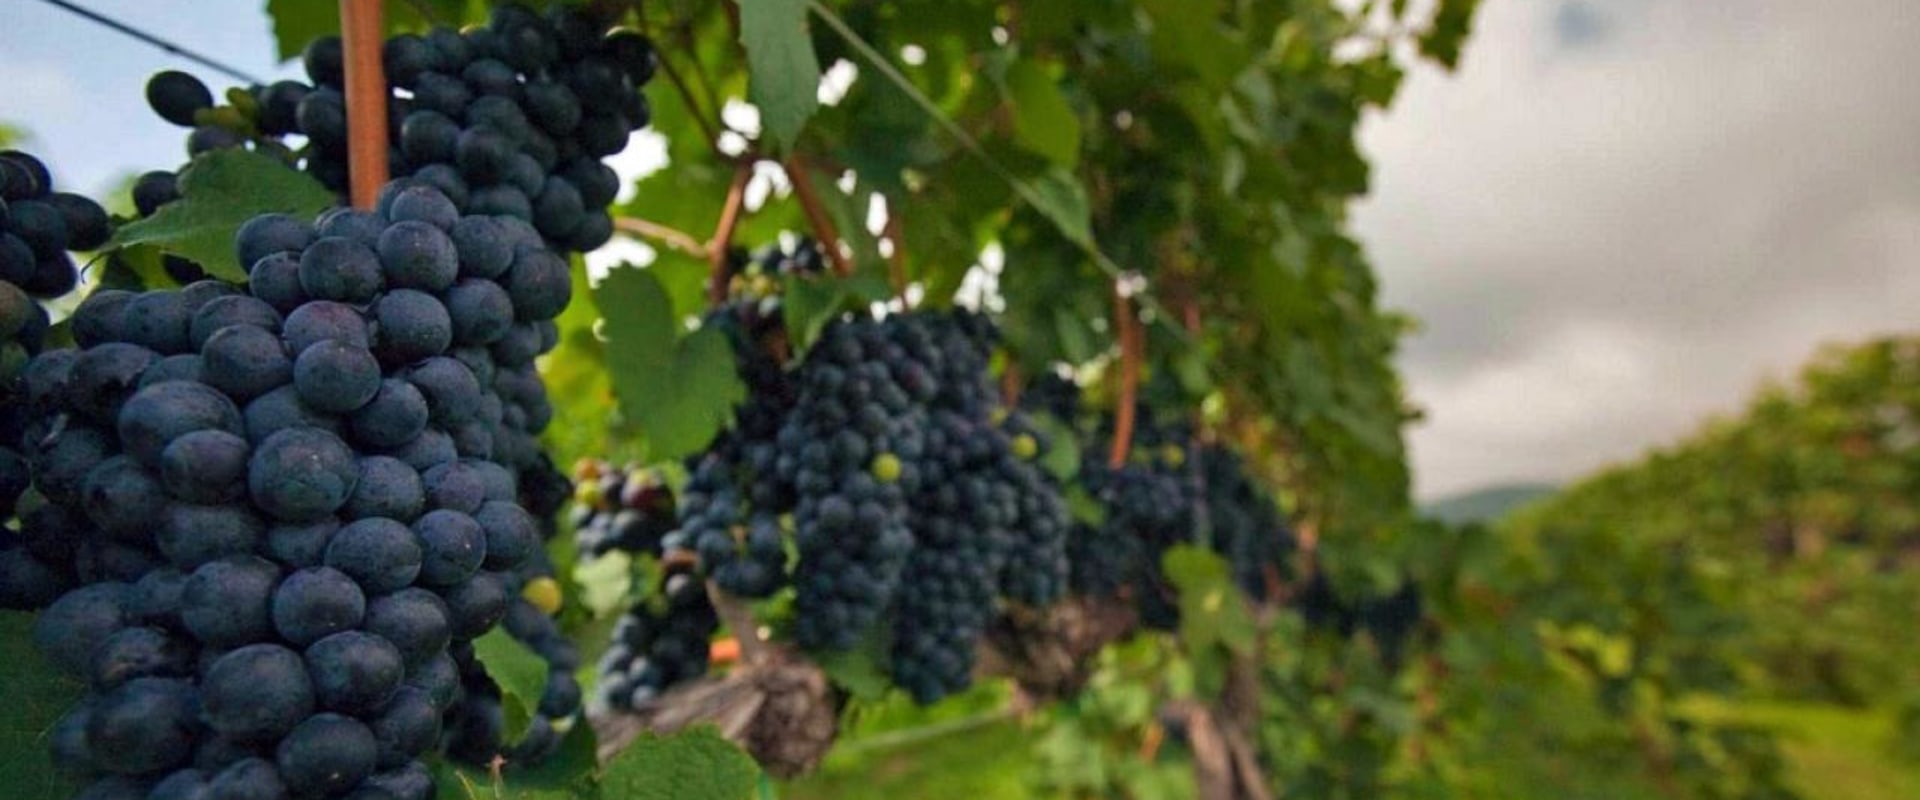 Exploring the Vineyards of Dulles, Virginia - An Expert's Guide